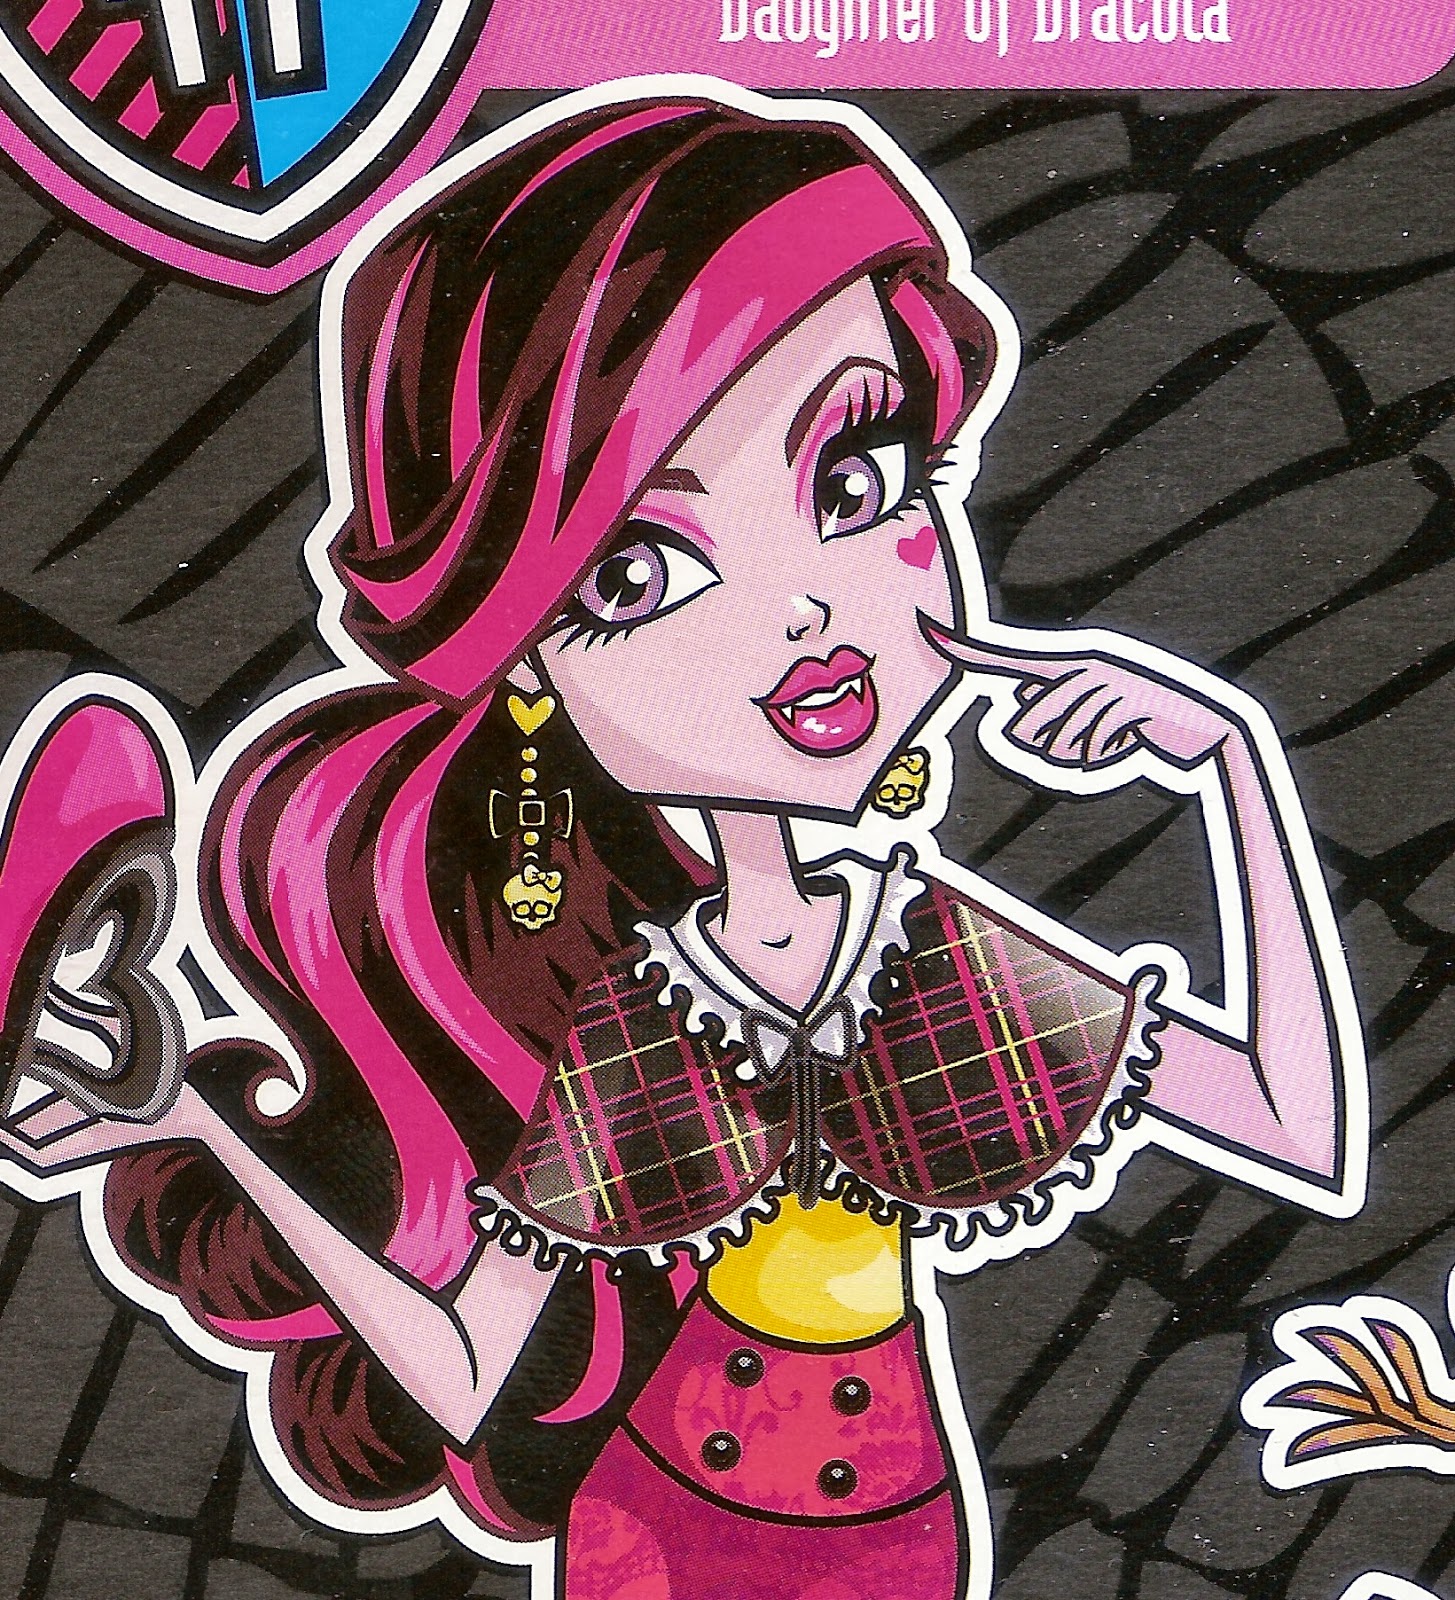 Did I get a Barbie closet for Draculaura? Yes : r/MonsterHigh